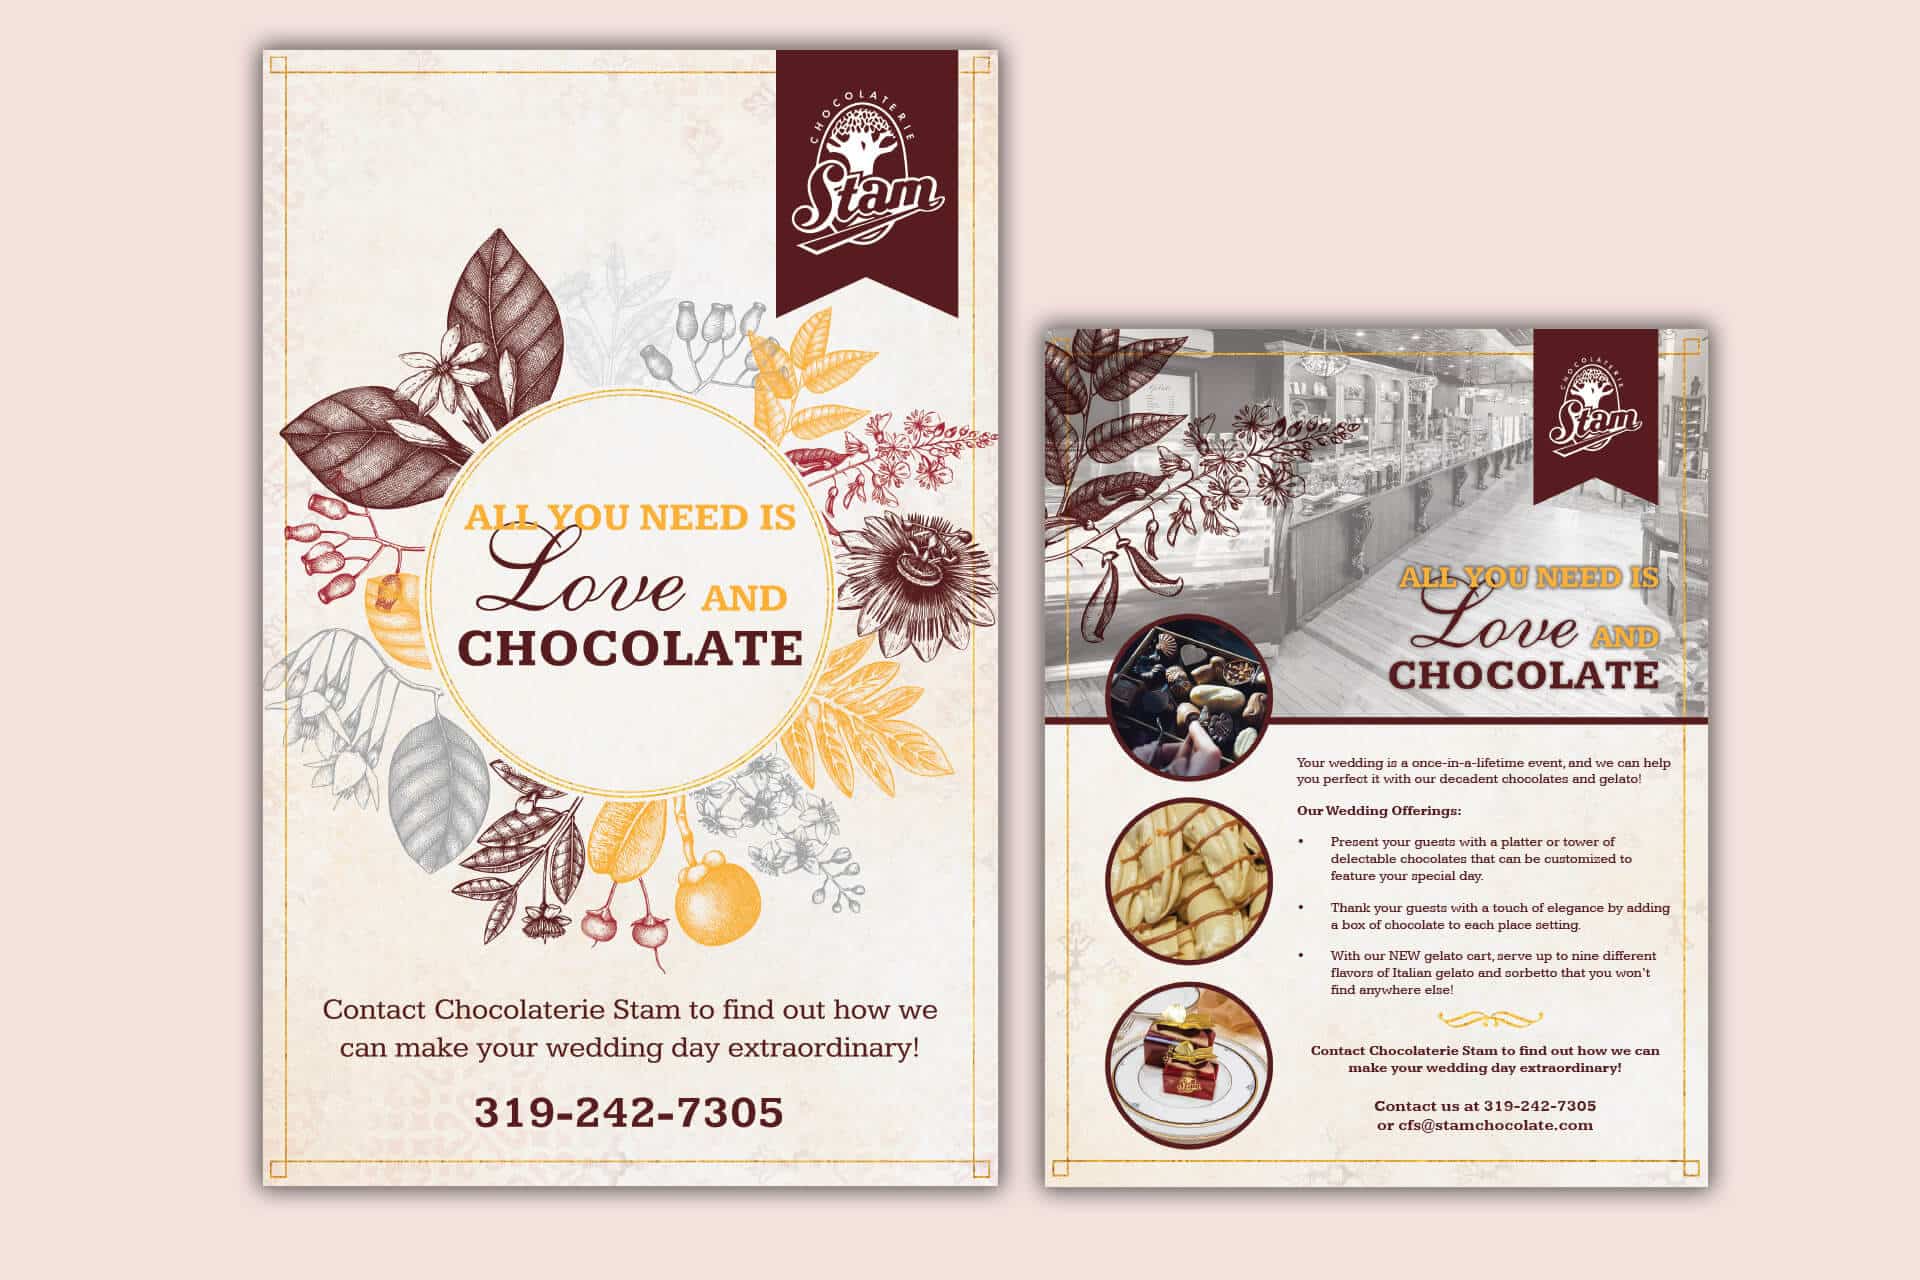 Chocolaterie Stam Wedding Poster and Flyer